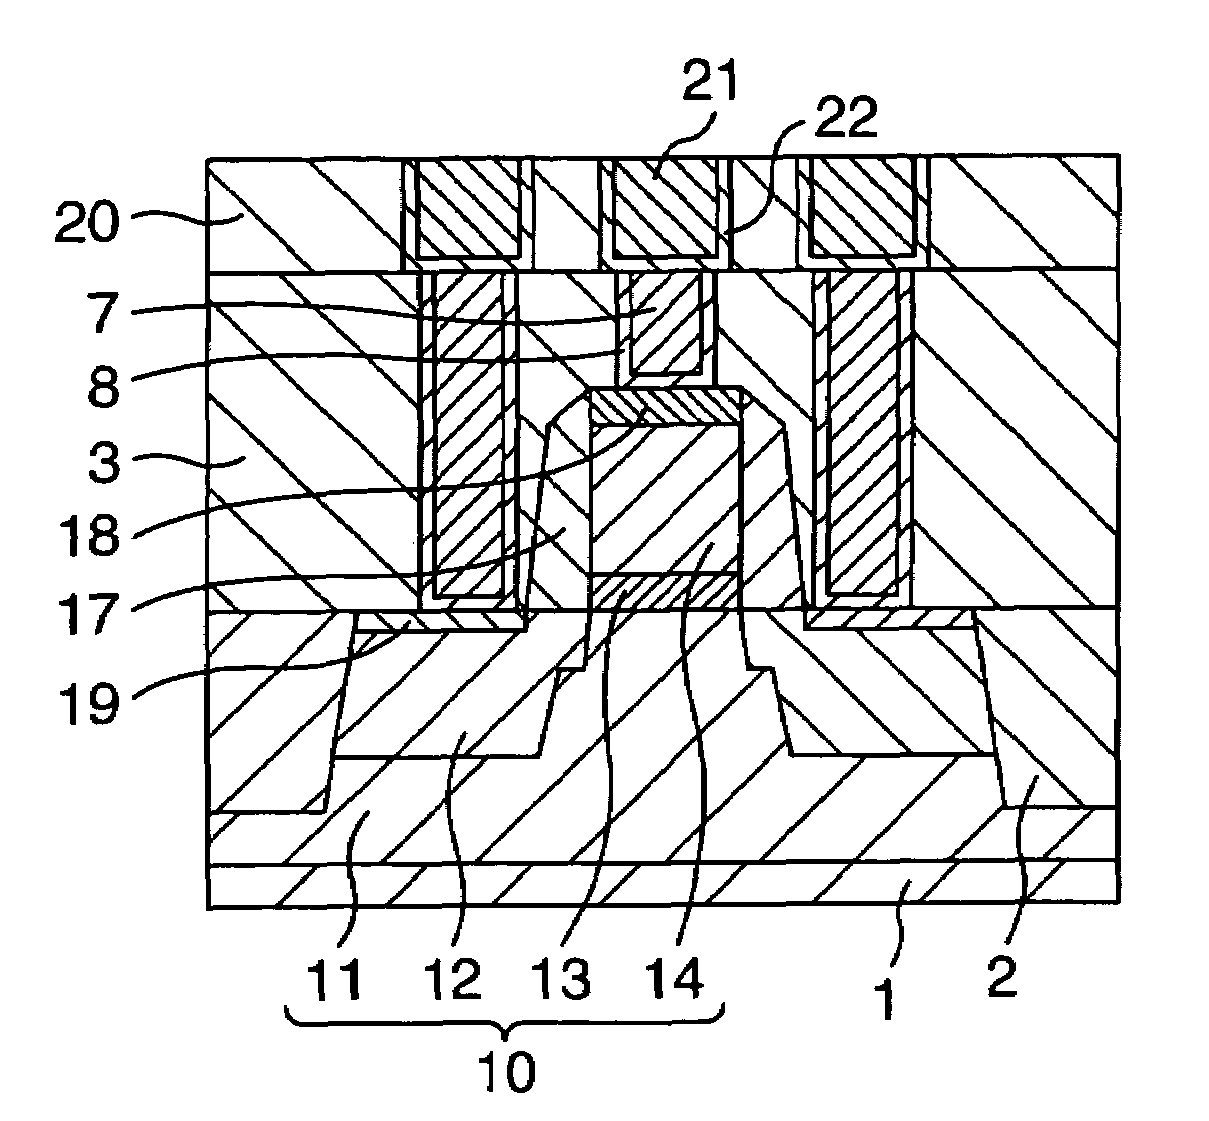 Semiconductor device configured for suppressed germanium diffusion from a germanium-doped regions and a method for fabrication thereof